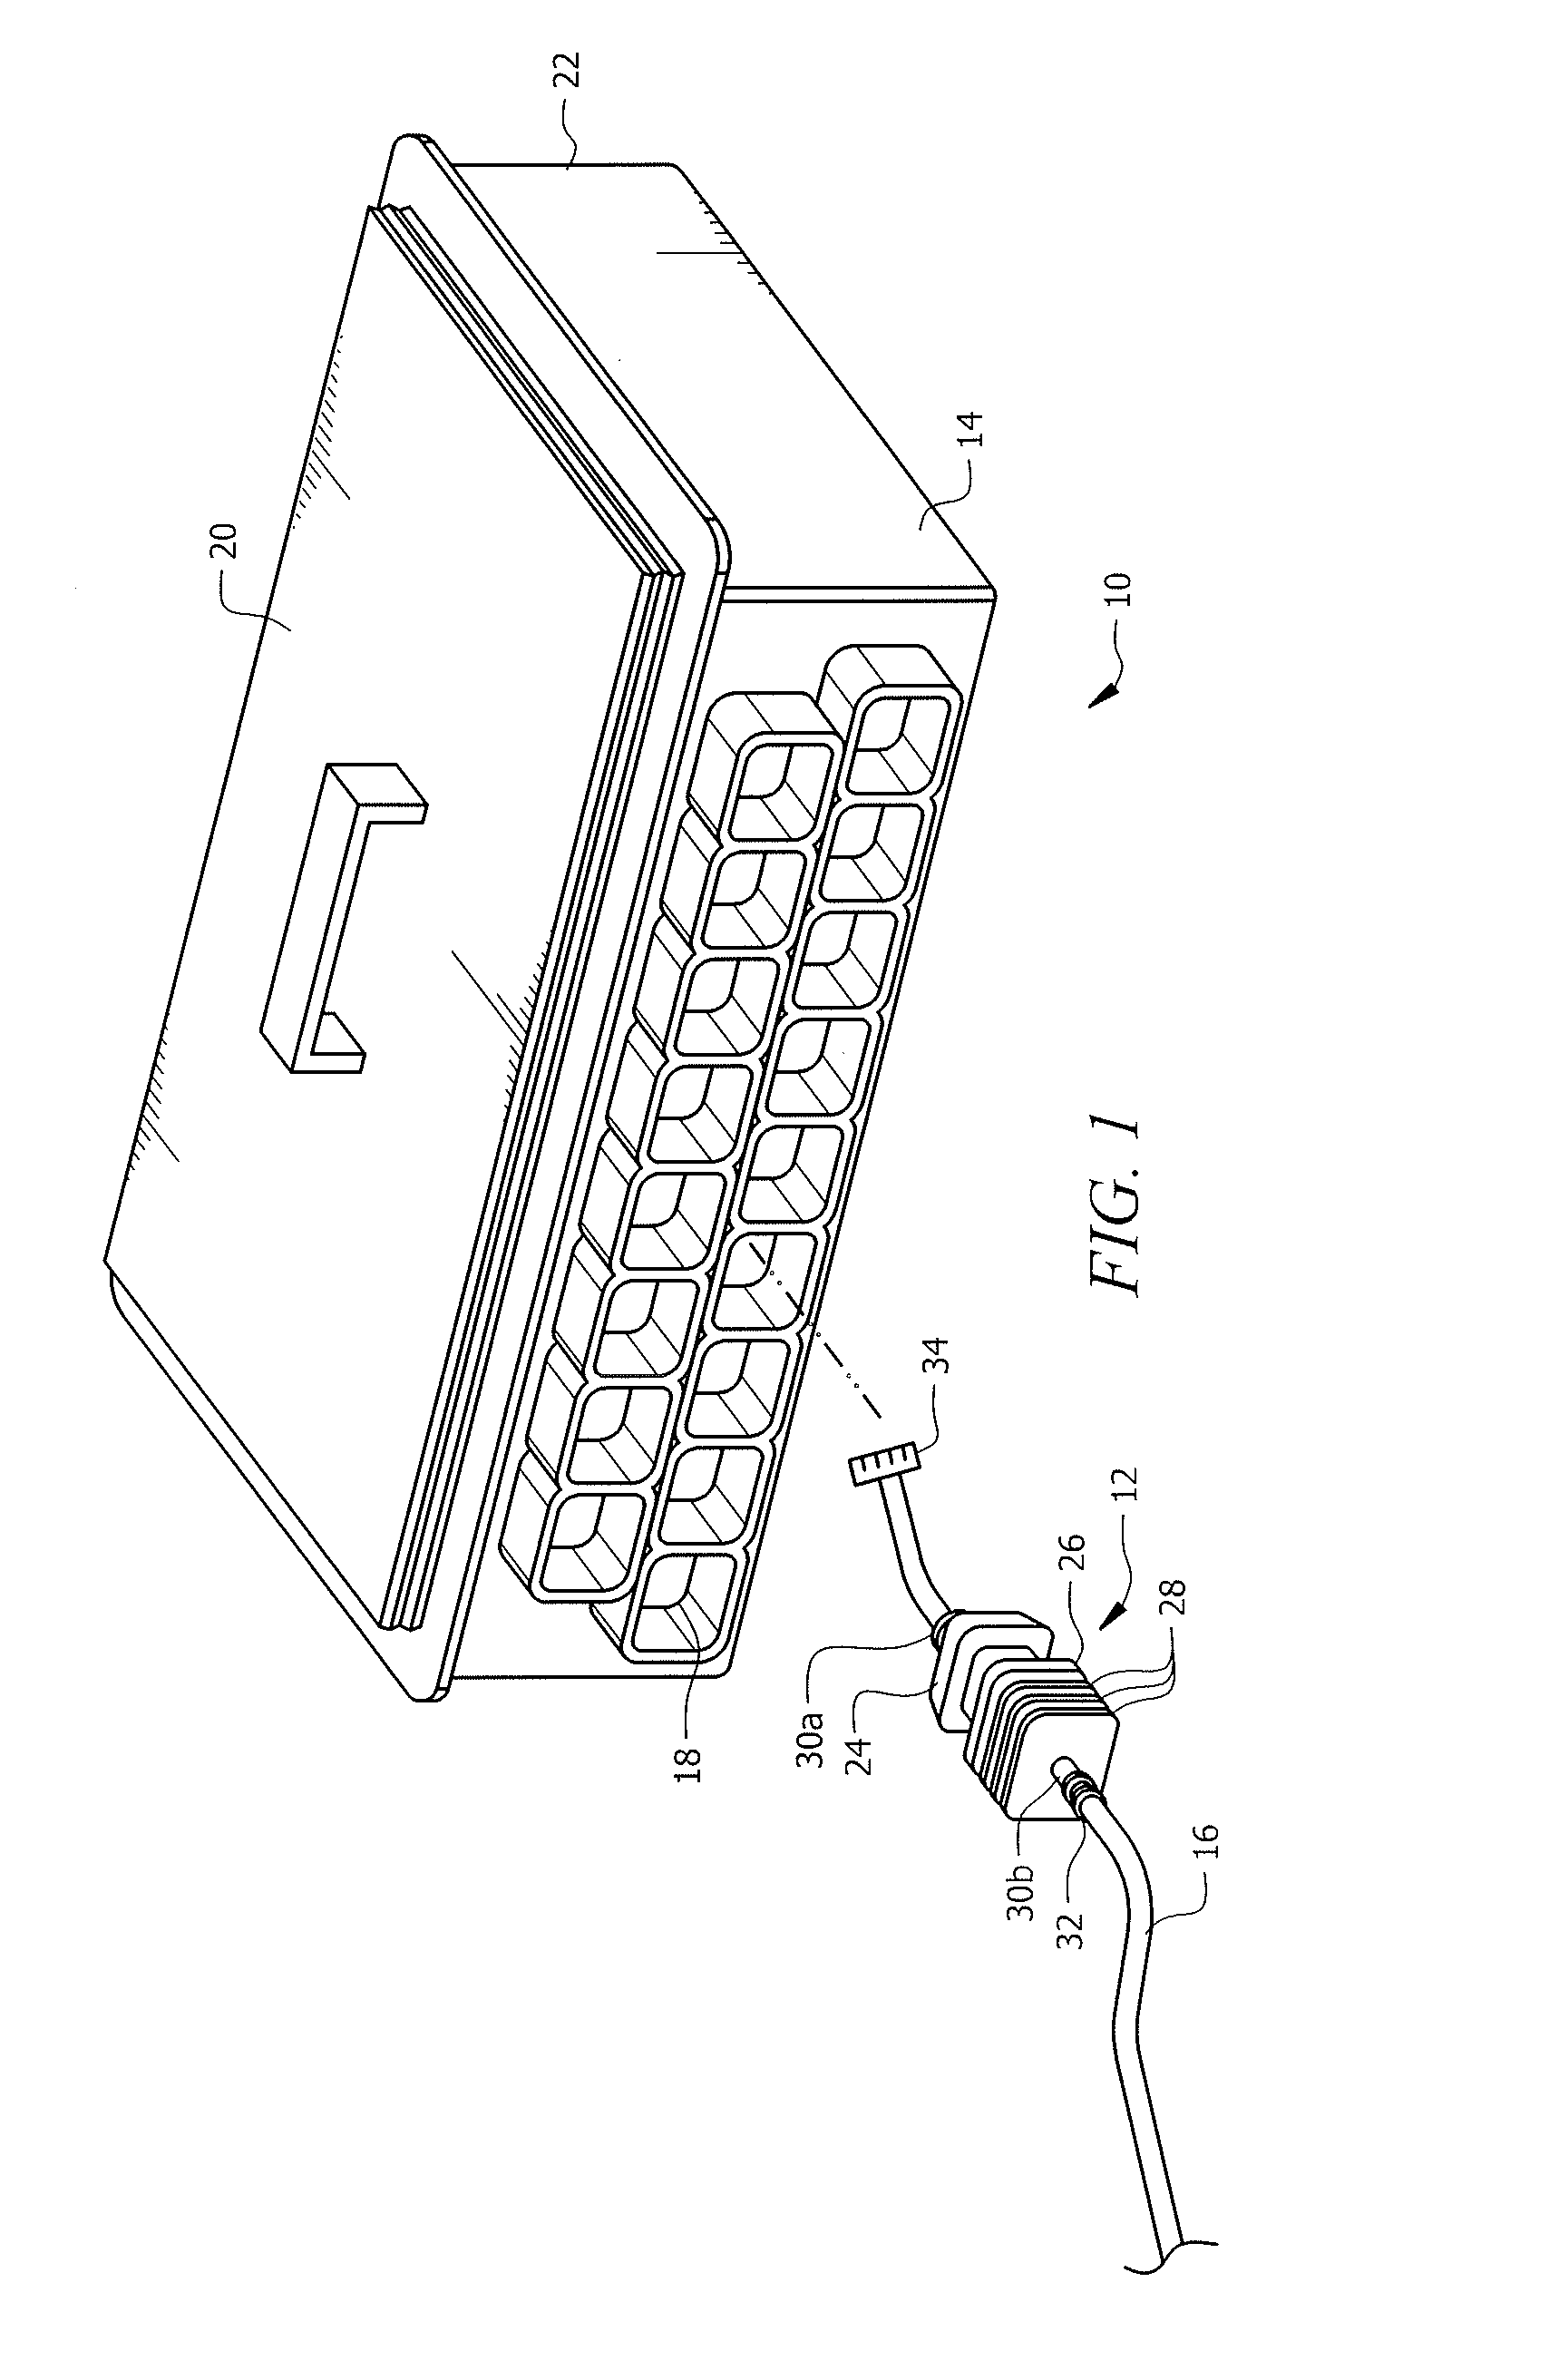 Connector plug with flexible ridges and having a hook with a beveled surface